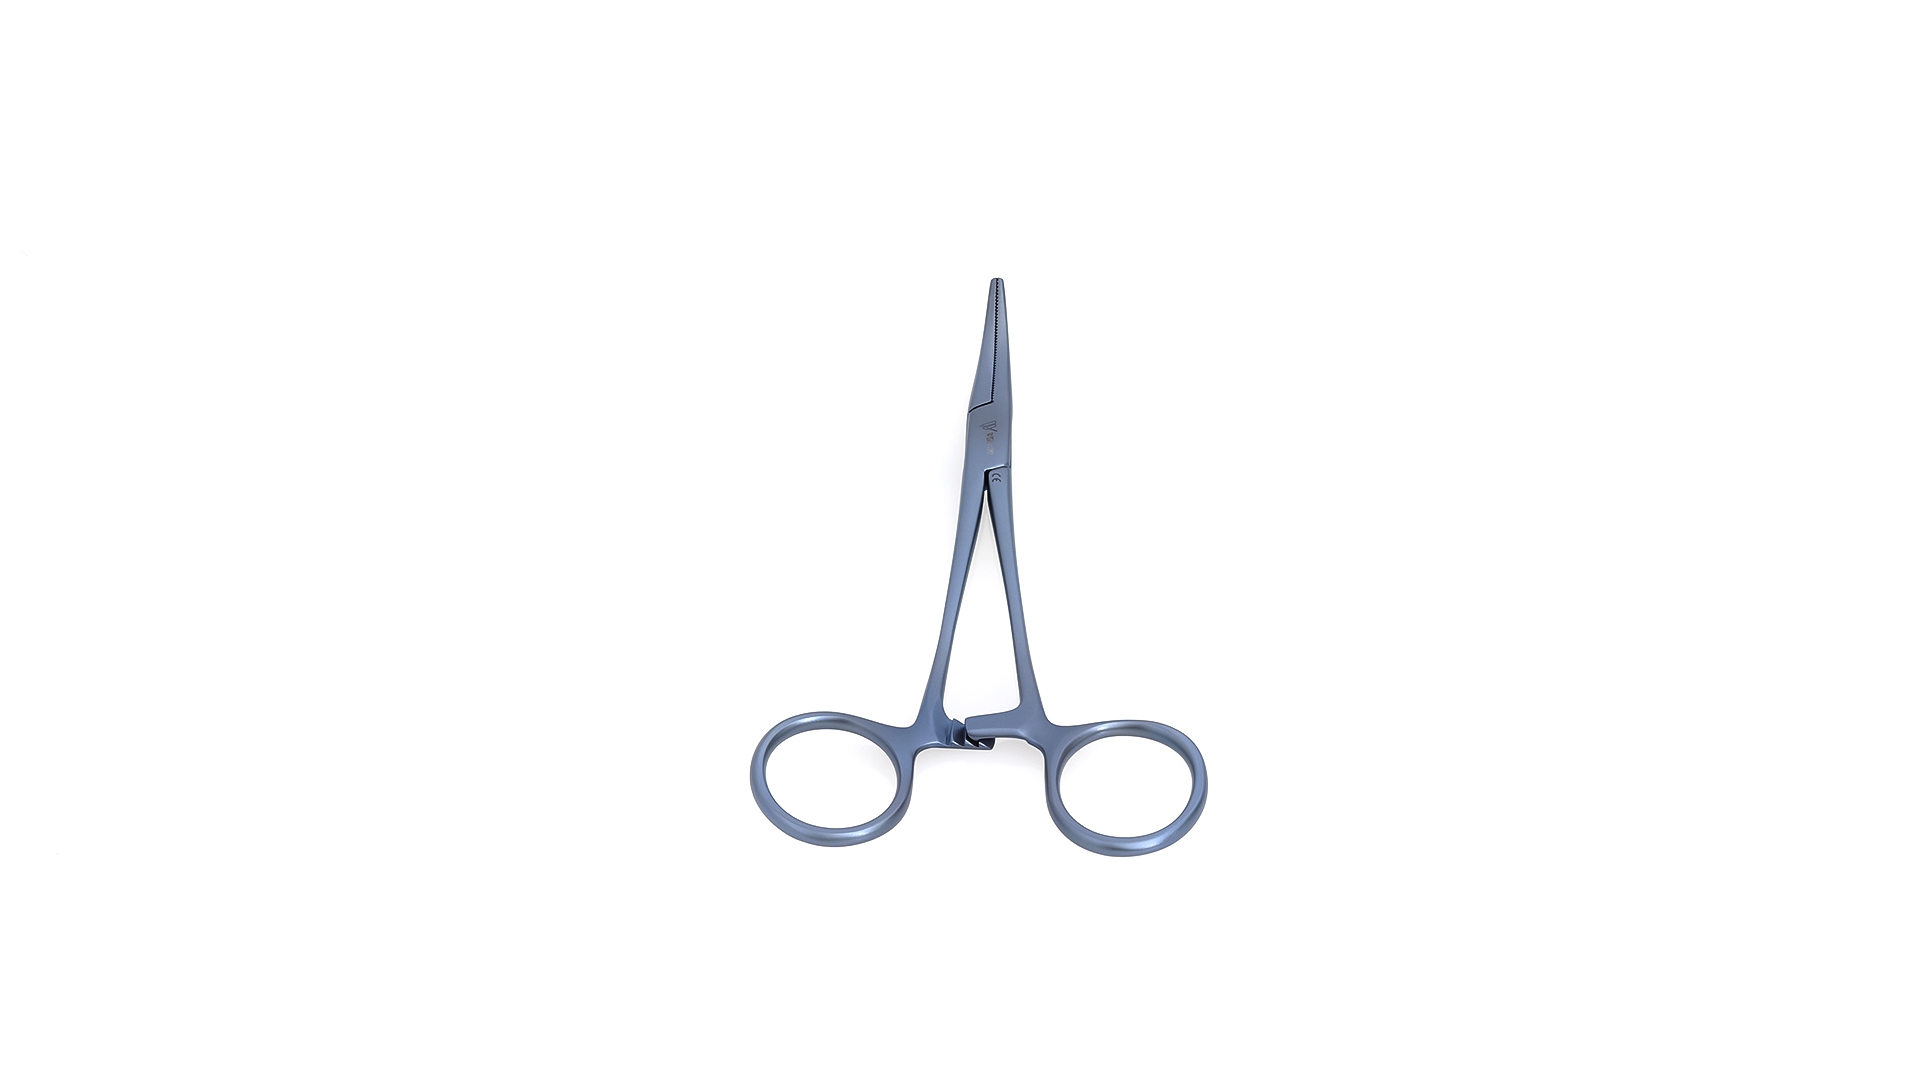 Crile Forceps - Curved serrated jaws